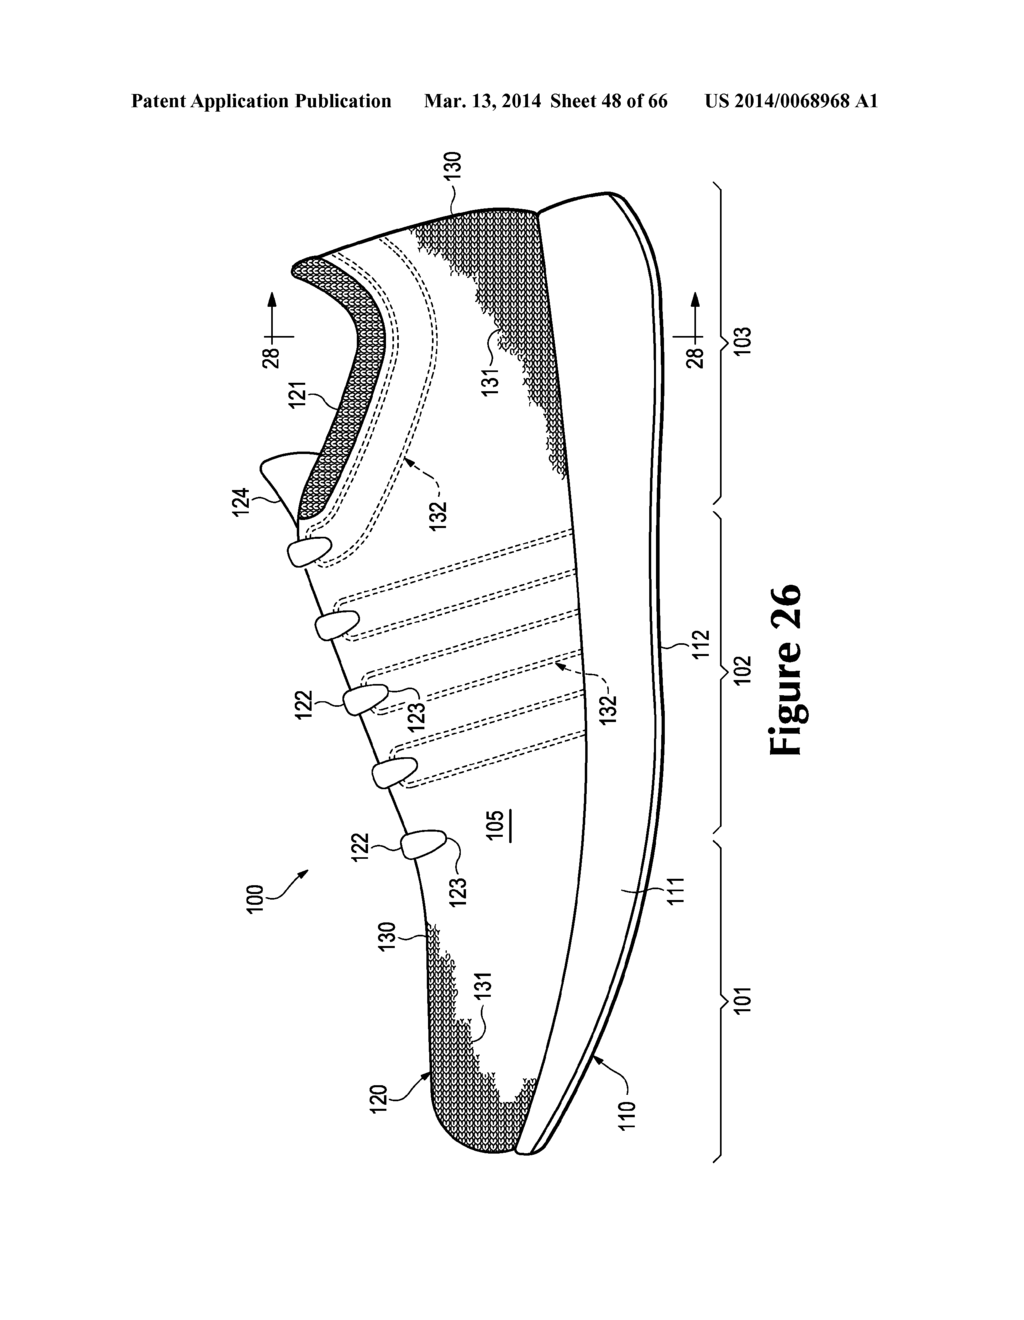 Knitted Component With Adjustable Inlaid Strand For An Article Of Footwear - diagram, schematic, and image 49